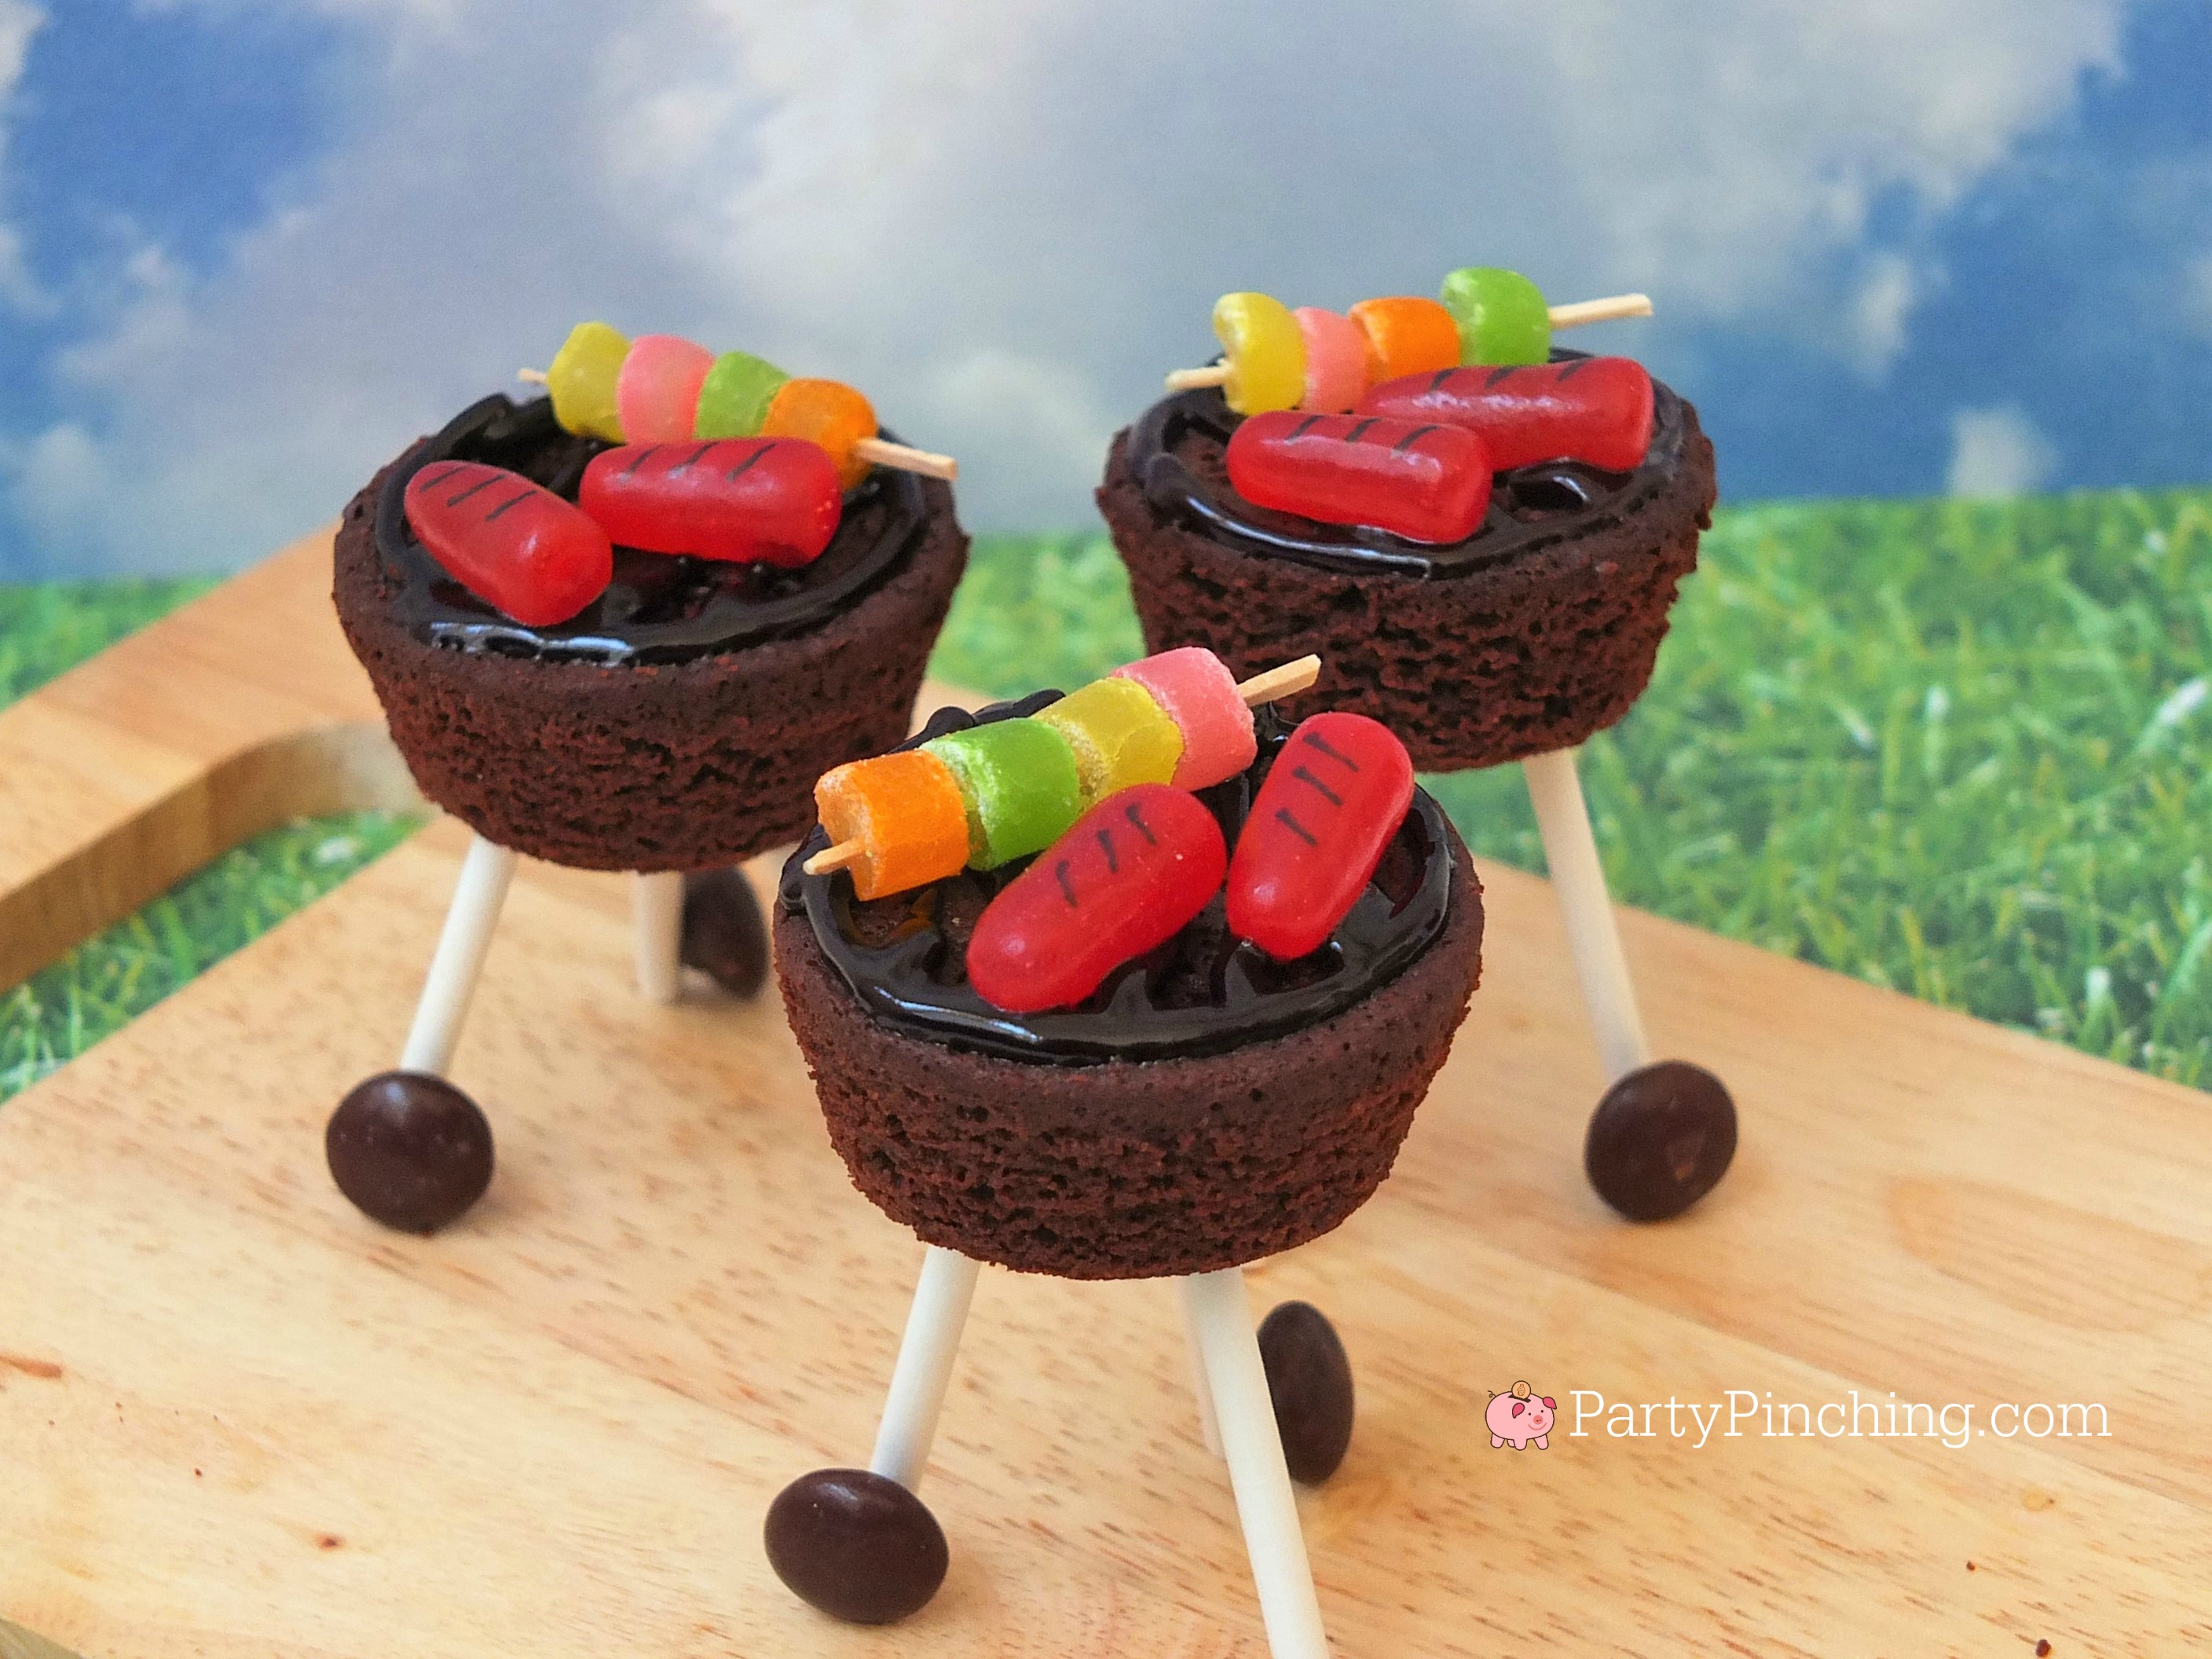 brownie outdoor grill, brownie grill bites, BBQ brownie grill with candy hot dog and skewers, candy skewer, candy grilled hot dogs, charcoal grill dessert brownies, sweet treat picnic BBQ brownies with wheels, kettle BBQ brownies